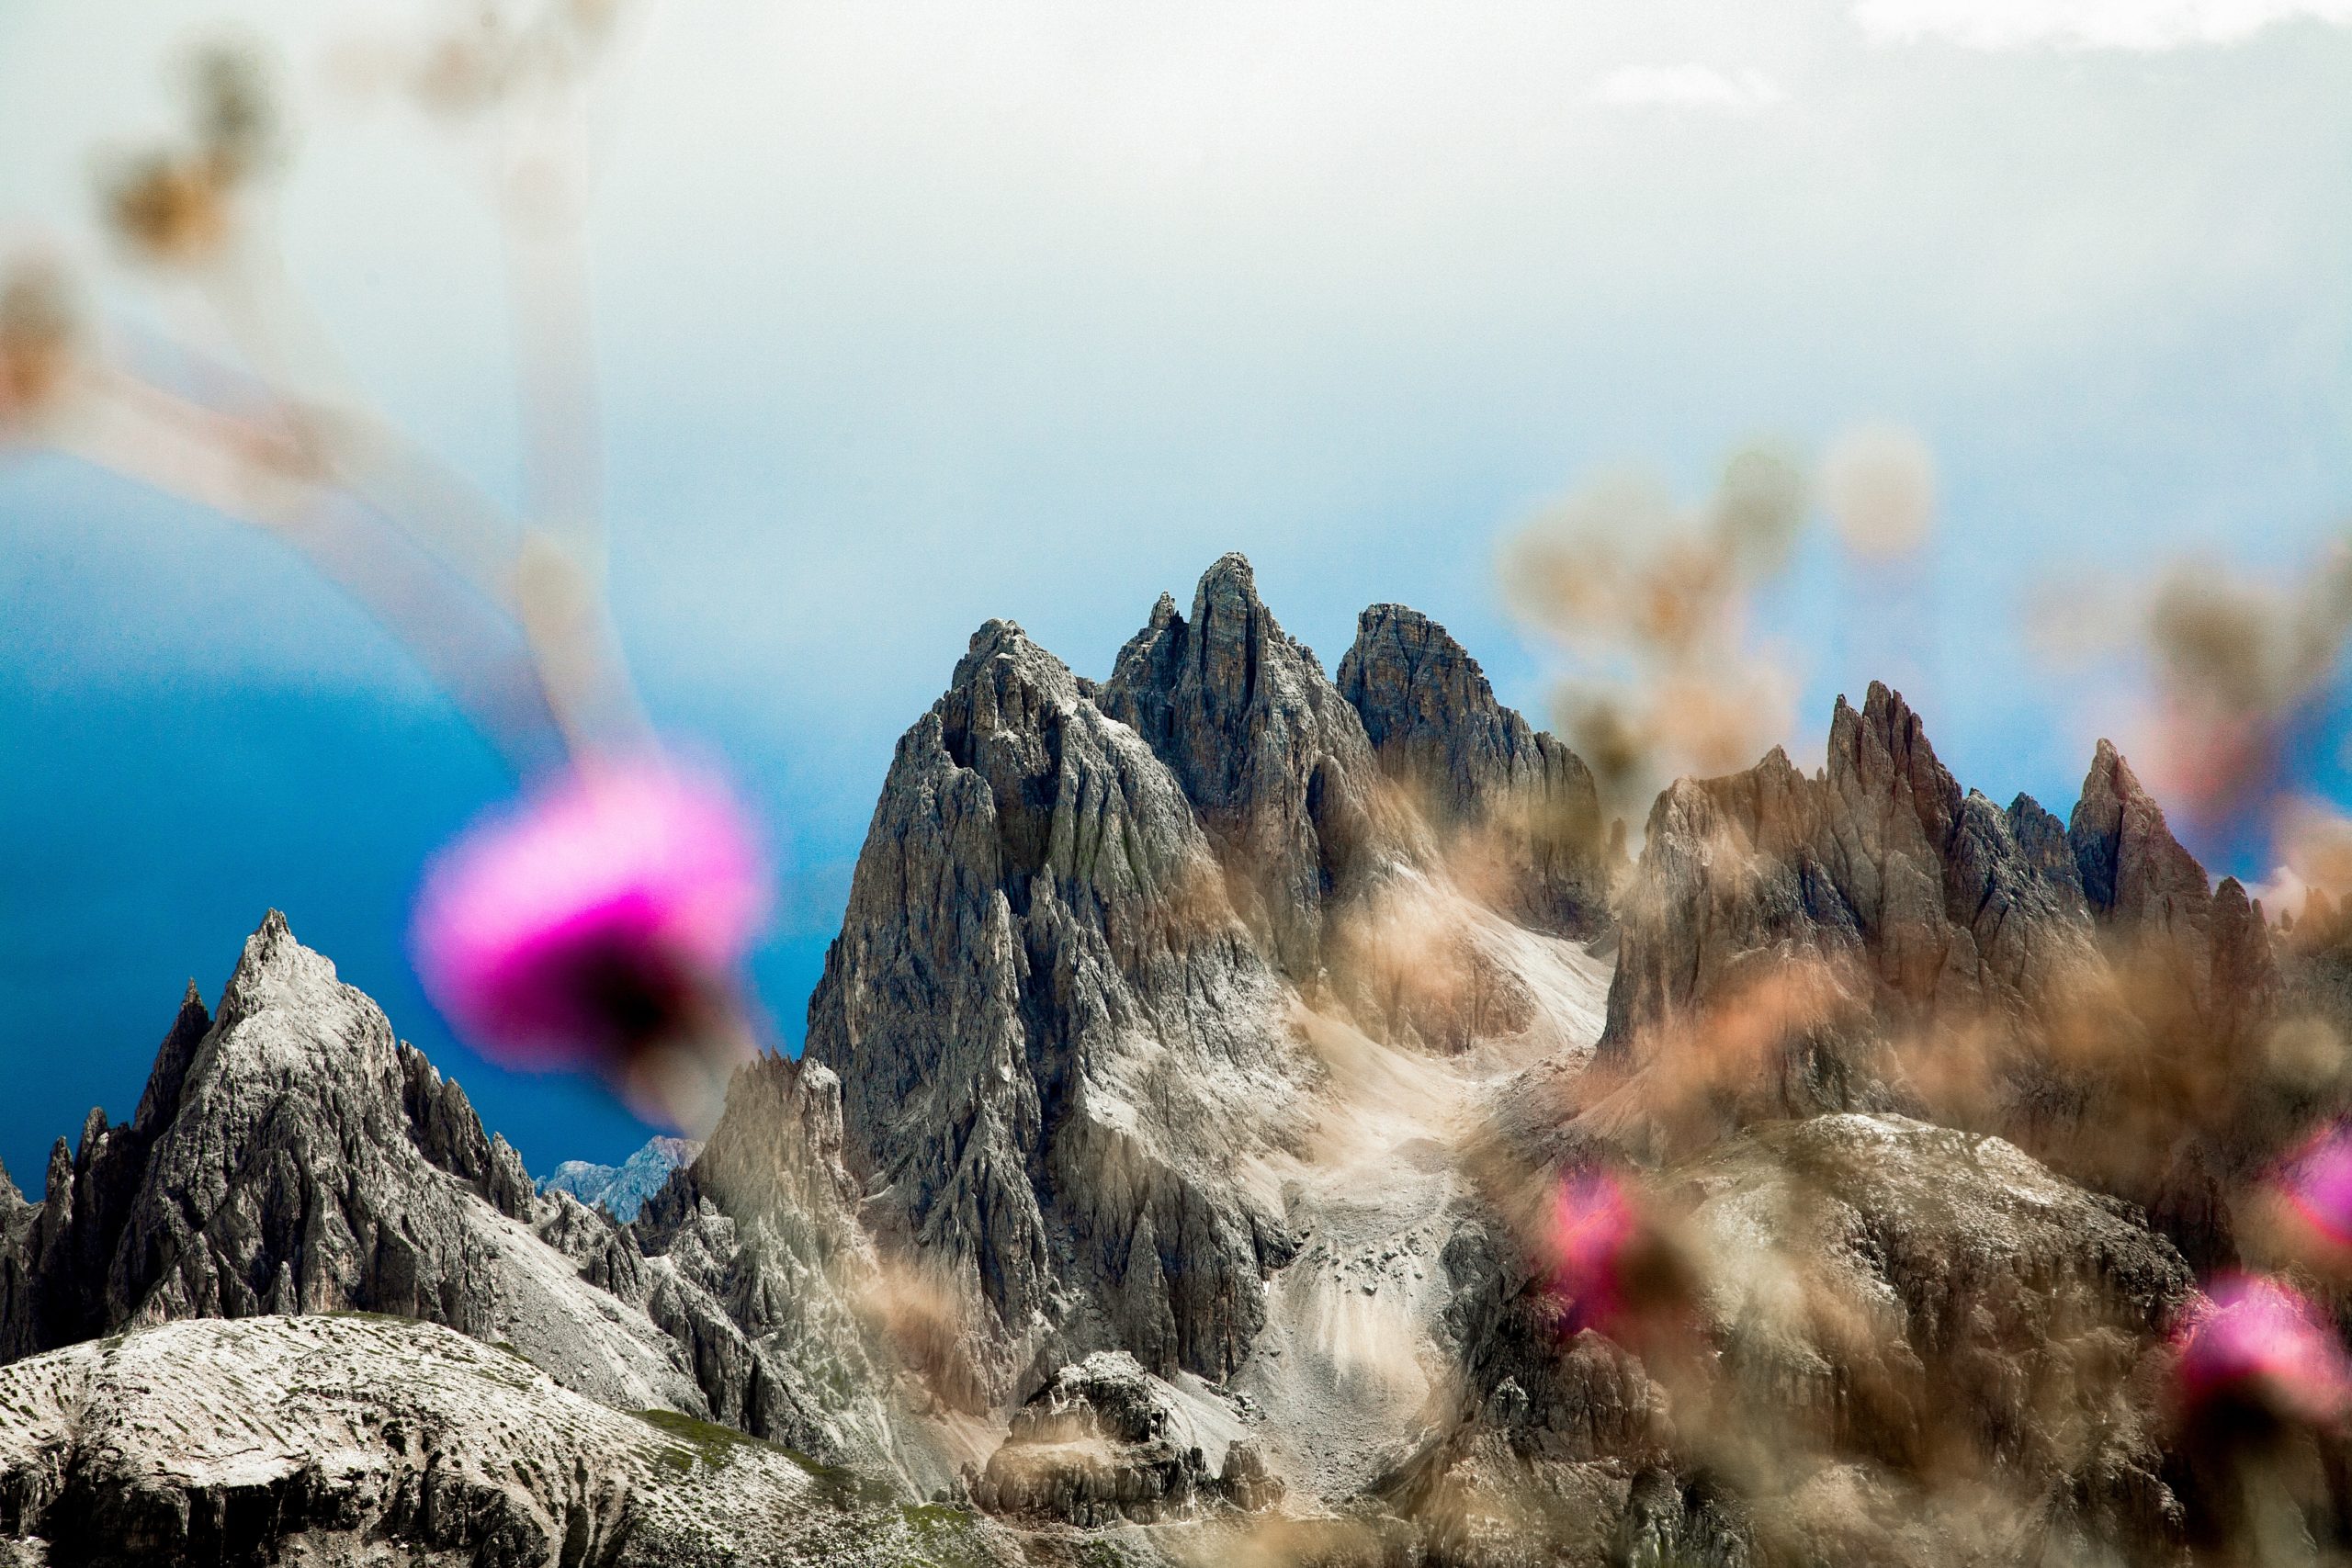 Tre Cime di Lavaredo, Italy, image of sharp mountain peaks with floral foreground